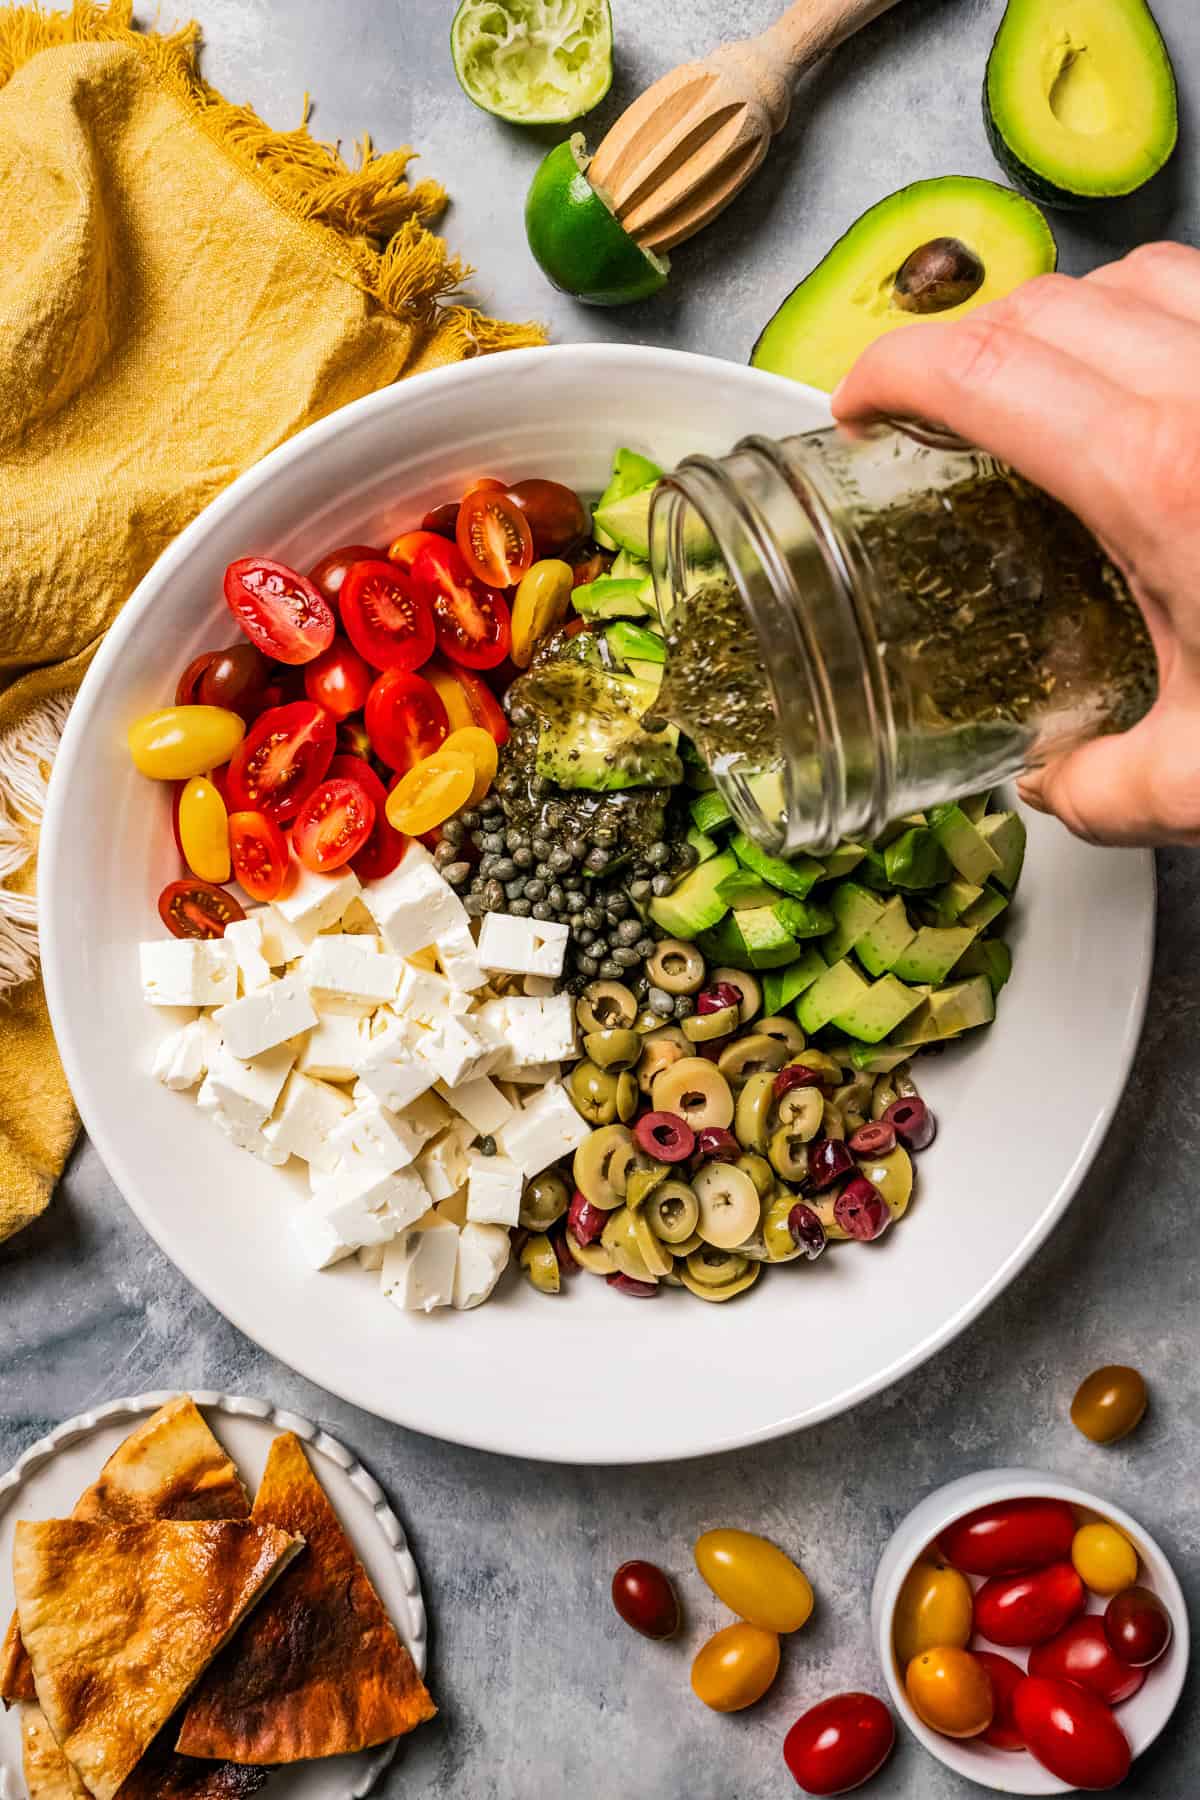 A hand pouring dressing from a jar over avocado salad in a large bowl.